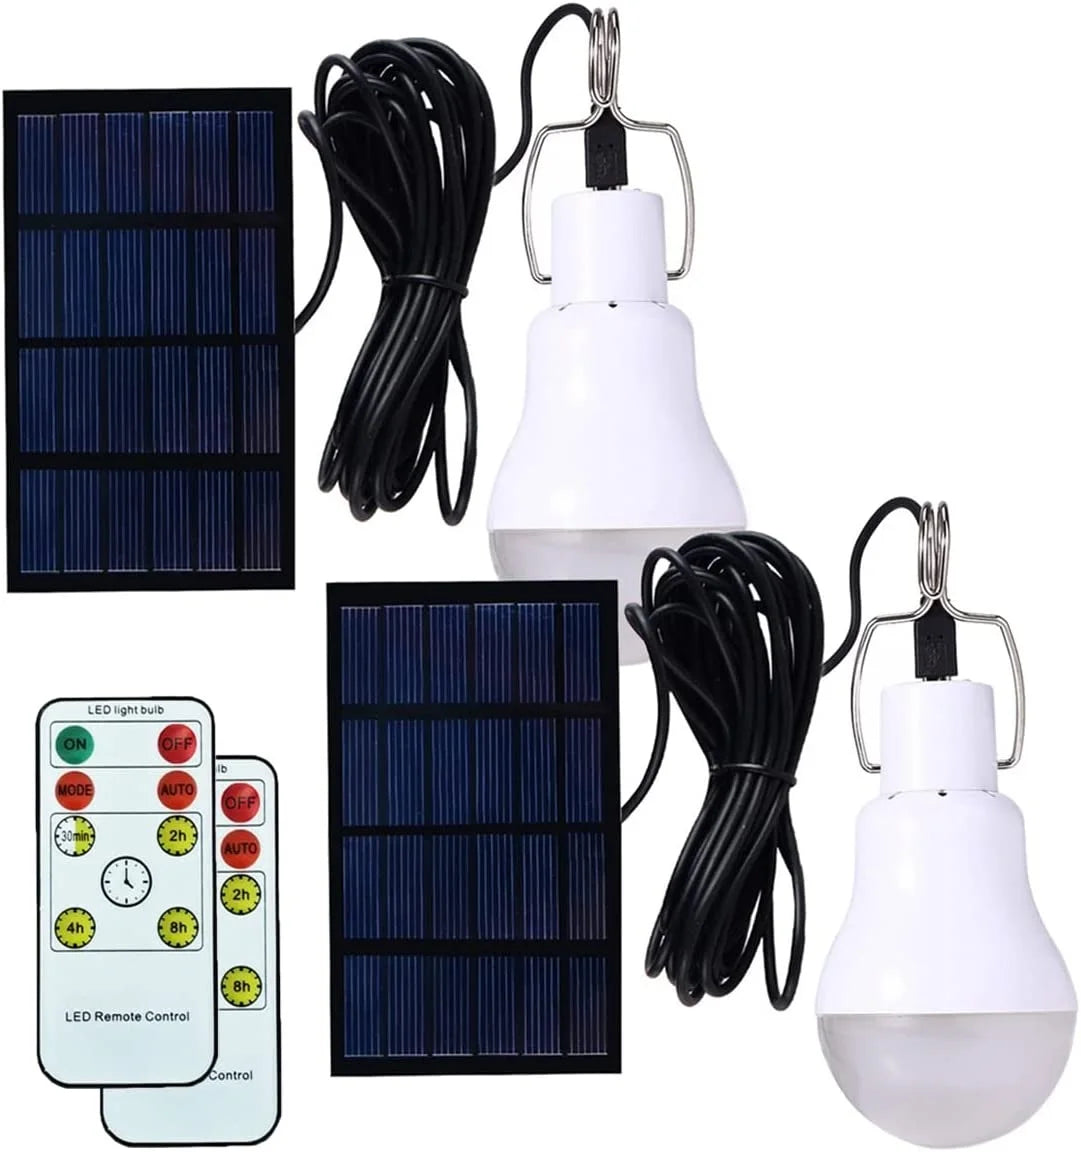 LED Solar Bulb Light, Automatically turns on when charged, with LED roaming control for continuous lighting.